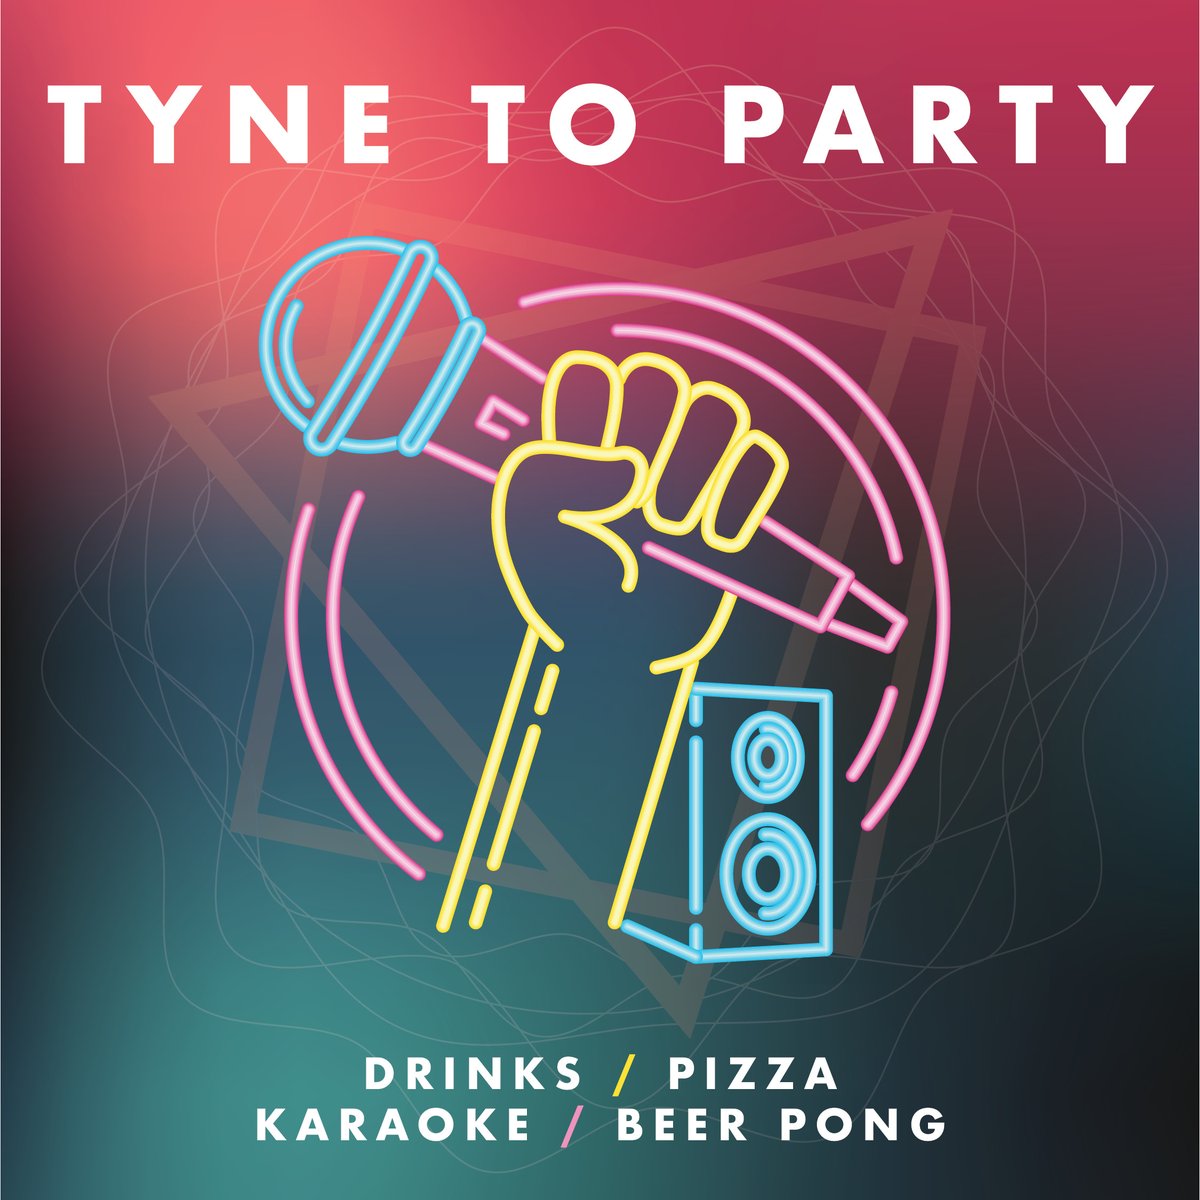 This Friday 26th Nov from 6pm, Mansion Tyne presents ‘Tyne to Party’ There will be drinks, pizza